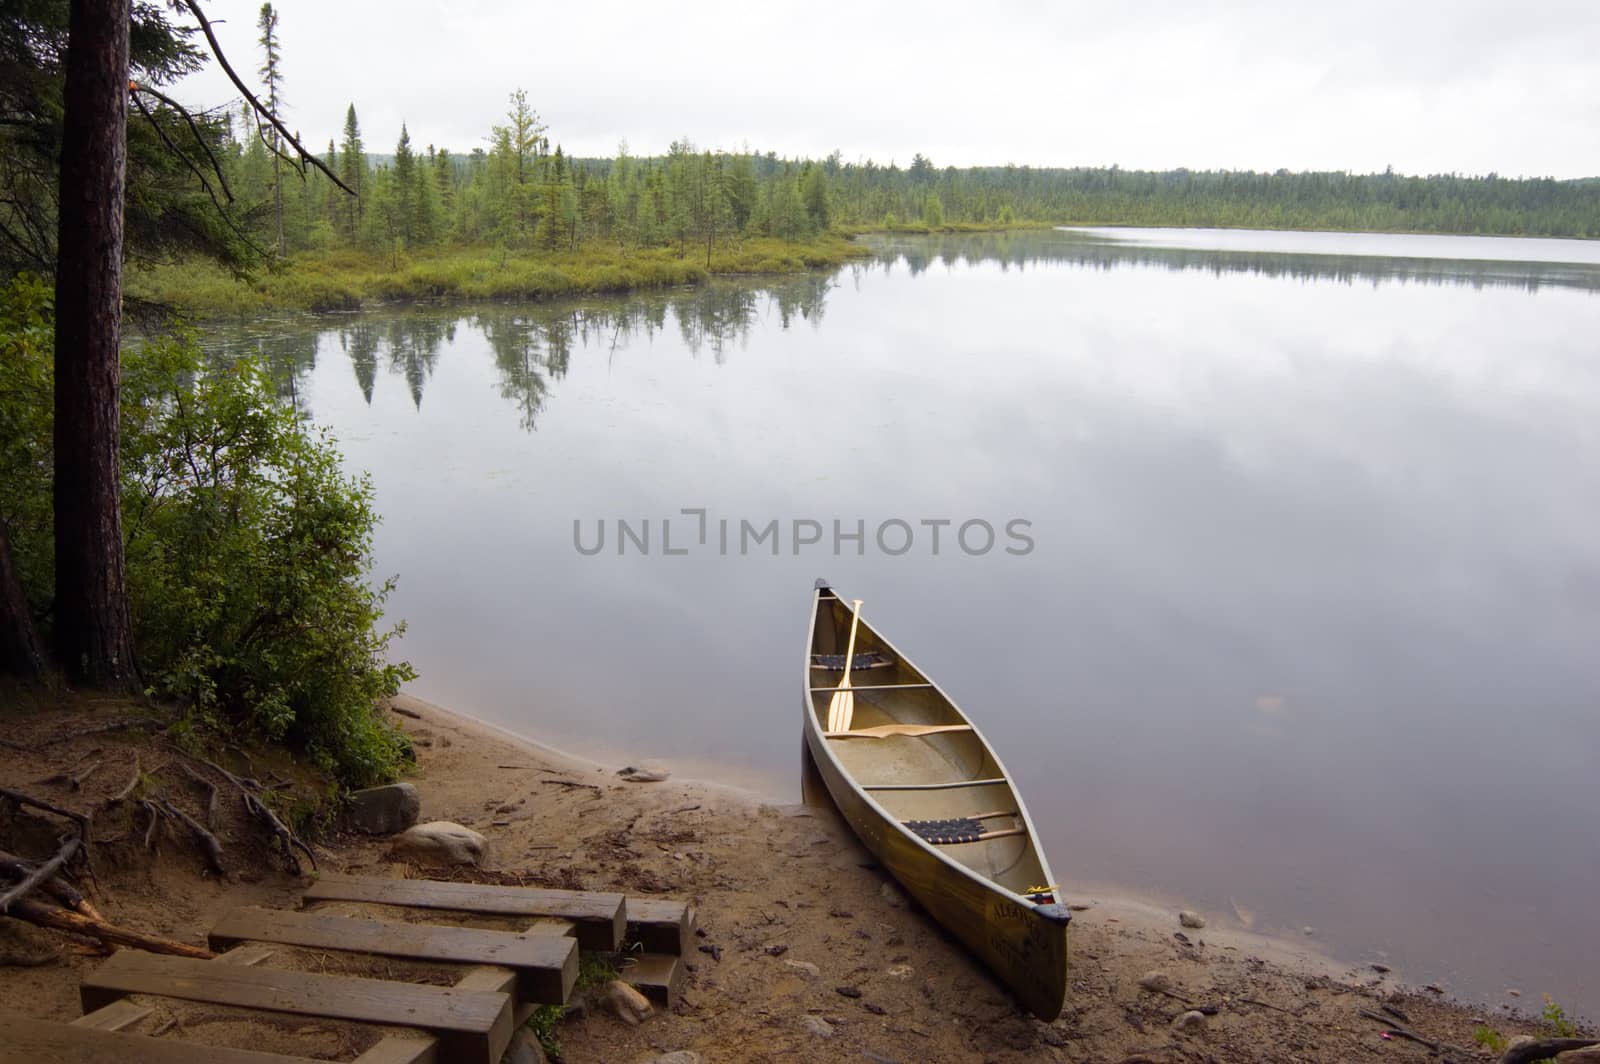 Lake and canoe before portage in rainy day in Algonquin Park